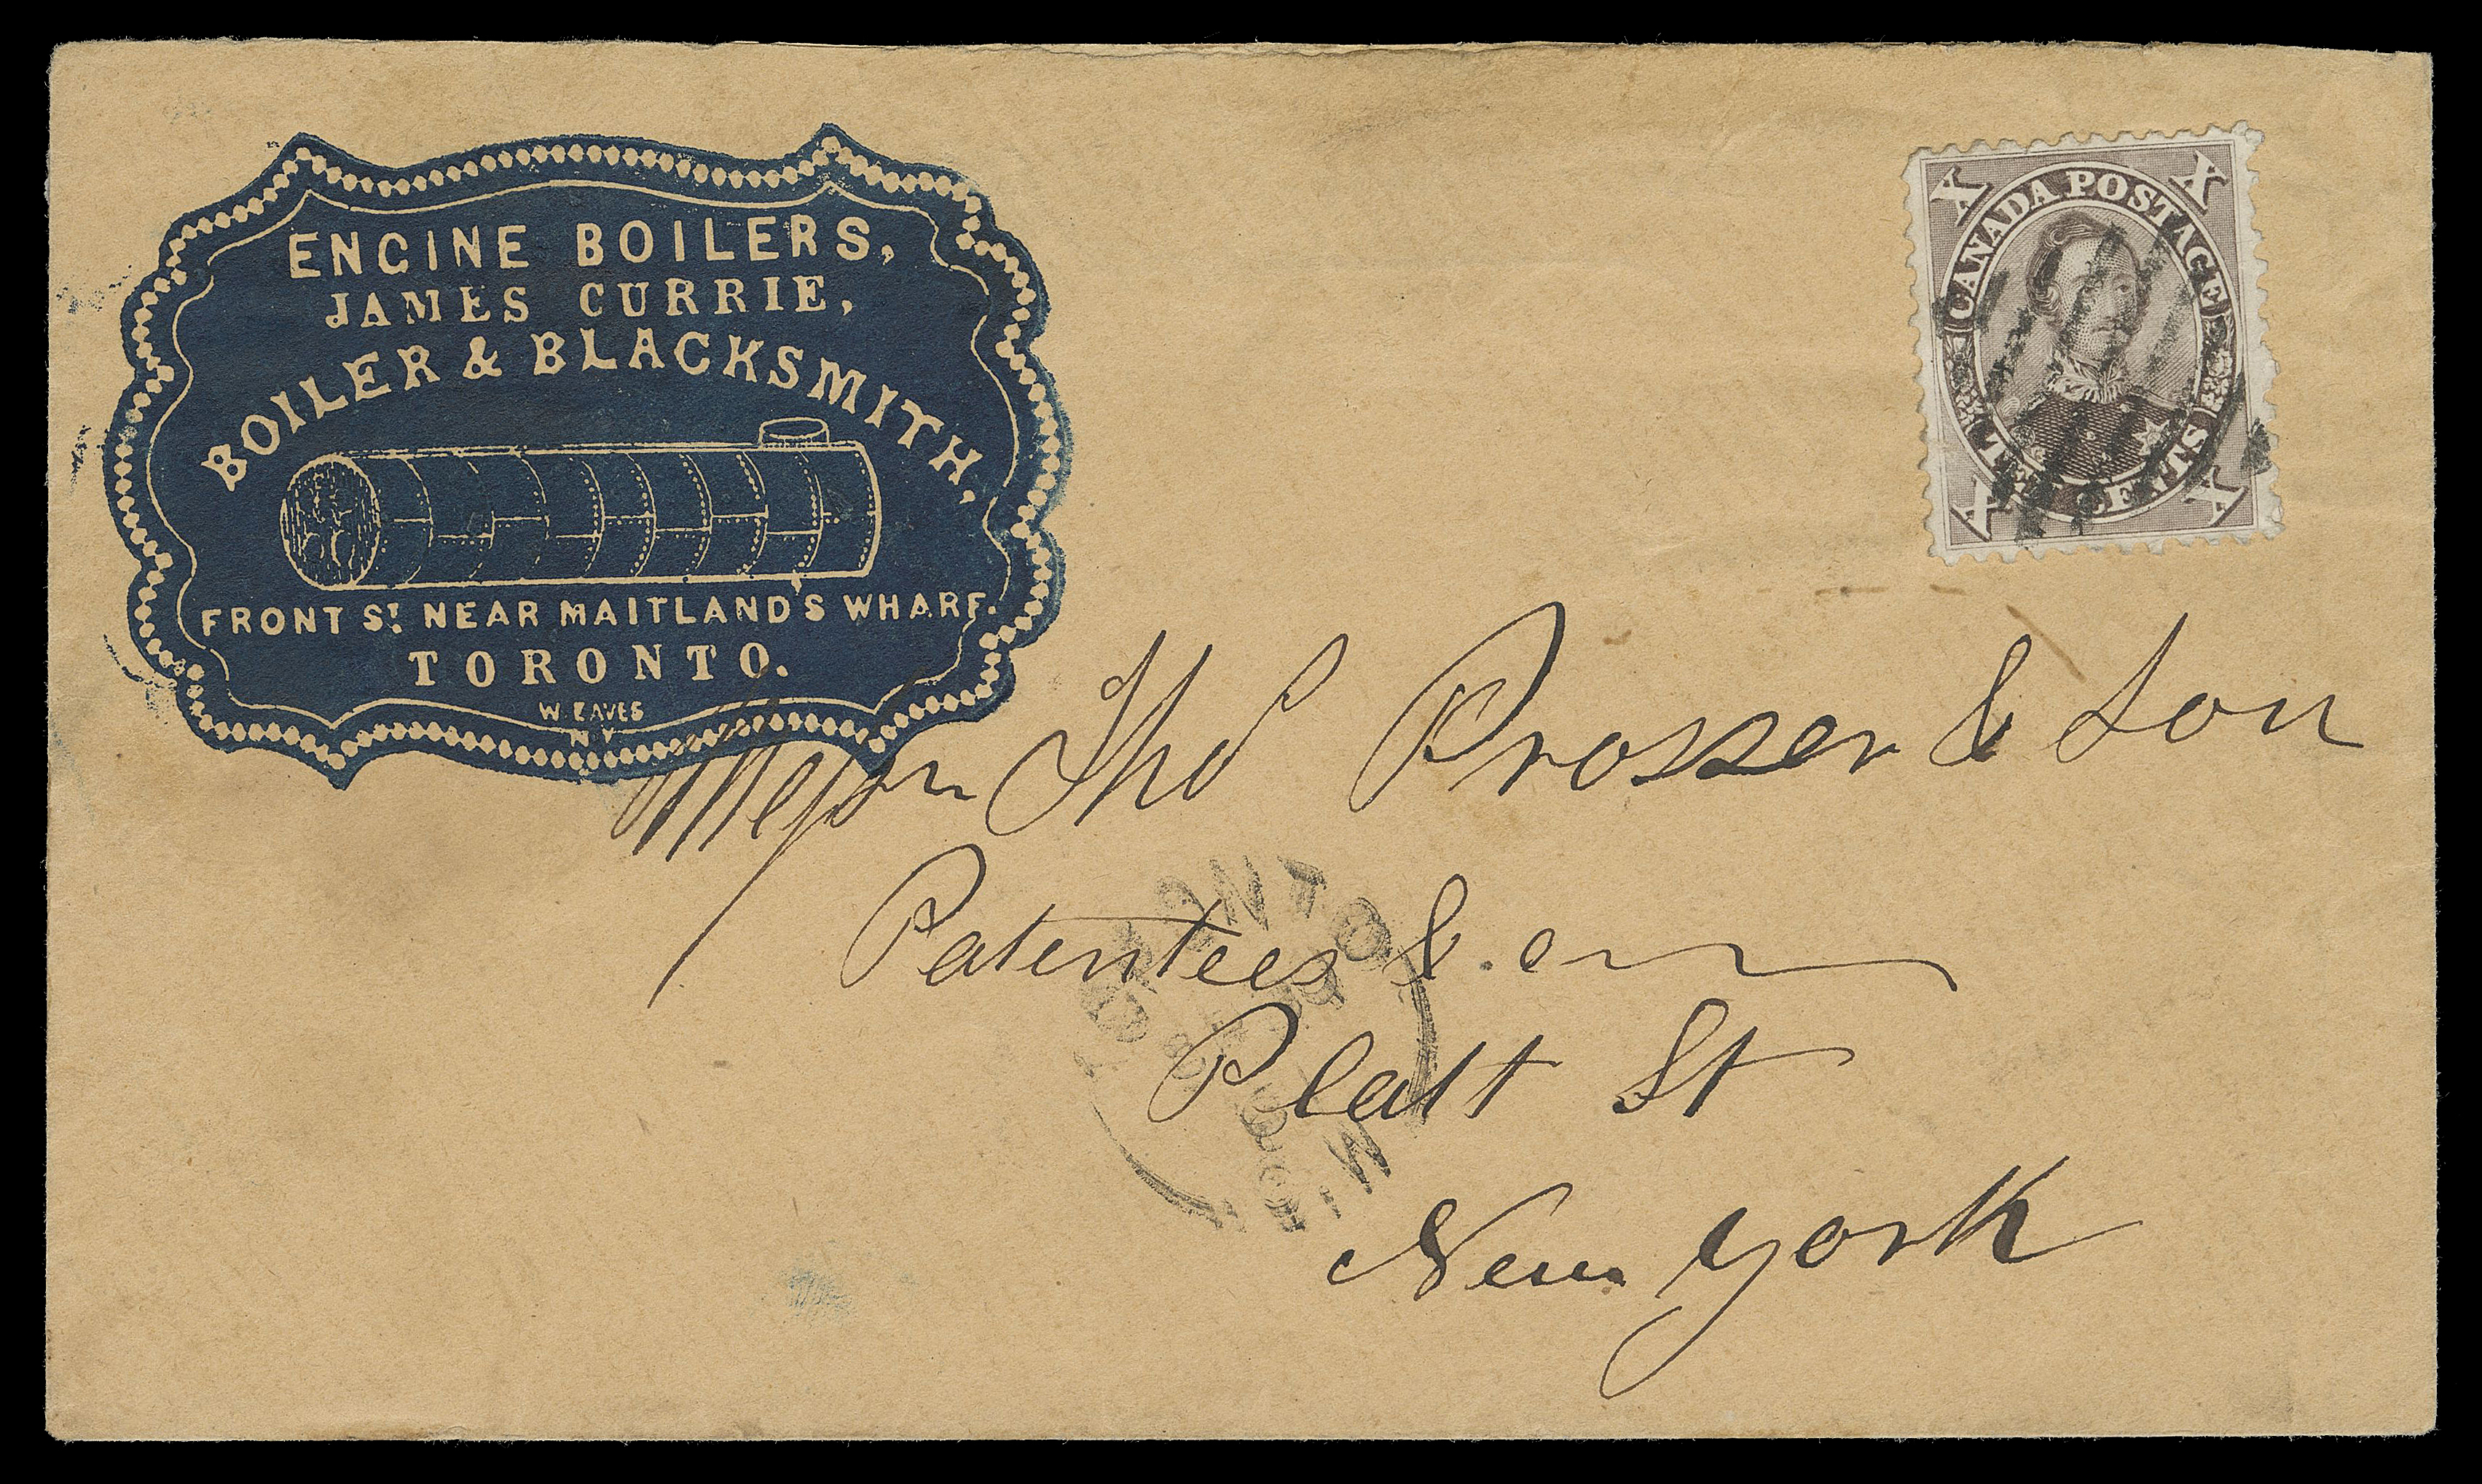 SIX PENCE AND TEN CENTS  1861 (September 30) Engine Boilers, James Currie, Boiler & Blacksmith, Toronto, dark blue cameo embossed advert on manila envelope, franked with a well centered 10c brownish sepia (PO 6A) perf 11¾, cancelled by diamond grid cancel, Toronto split ring dispatch at foot, addressed to New York; some paper adhered on backflap, no backstamp as customary for mail to the US, VF (Unitrade 17b early printing)